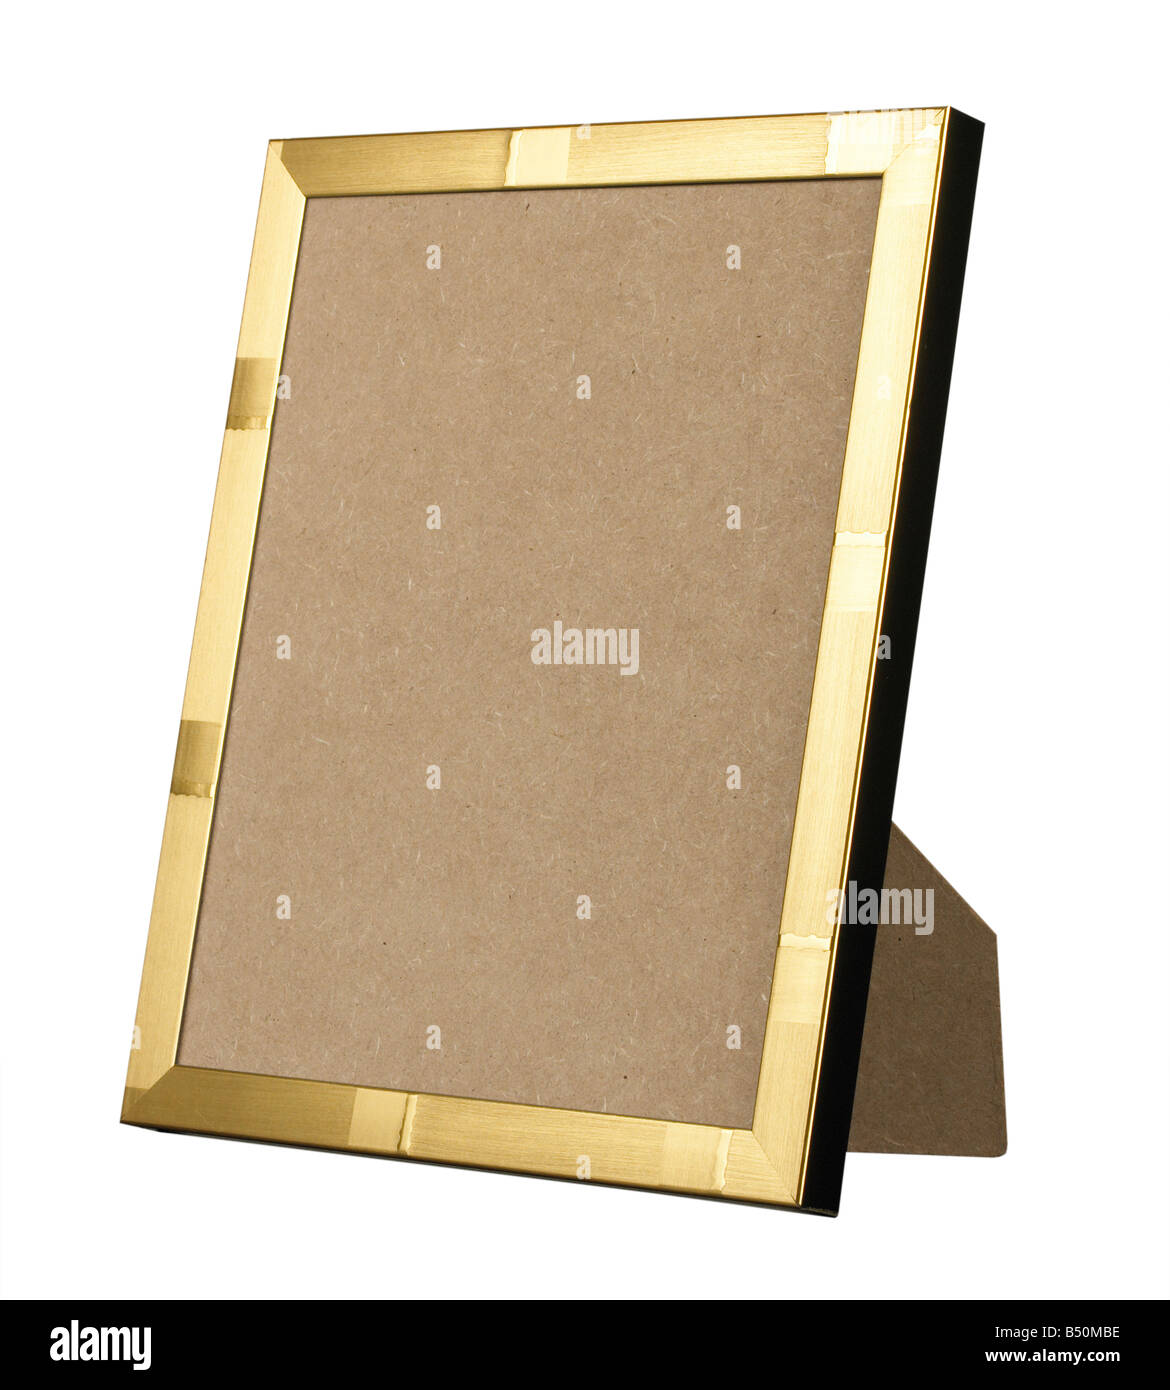 PICTURE FRAME GOLD GILT WOOD STAND STANDING Stock Photo